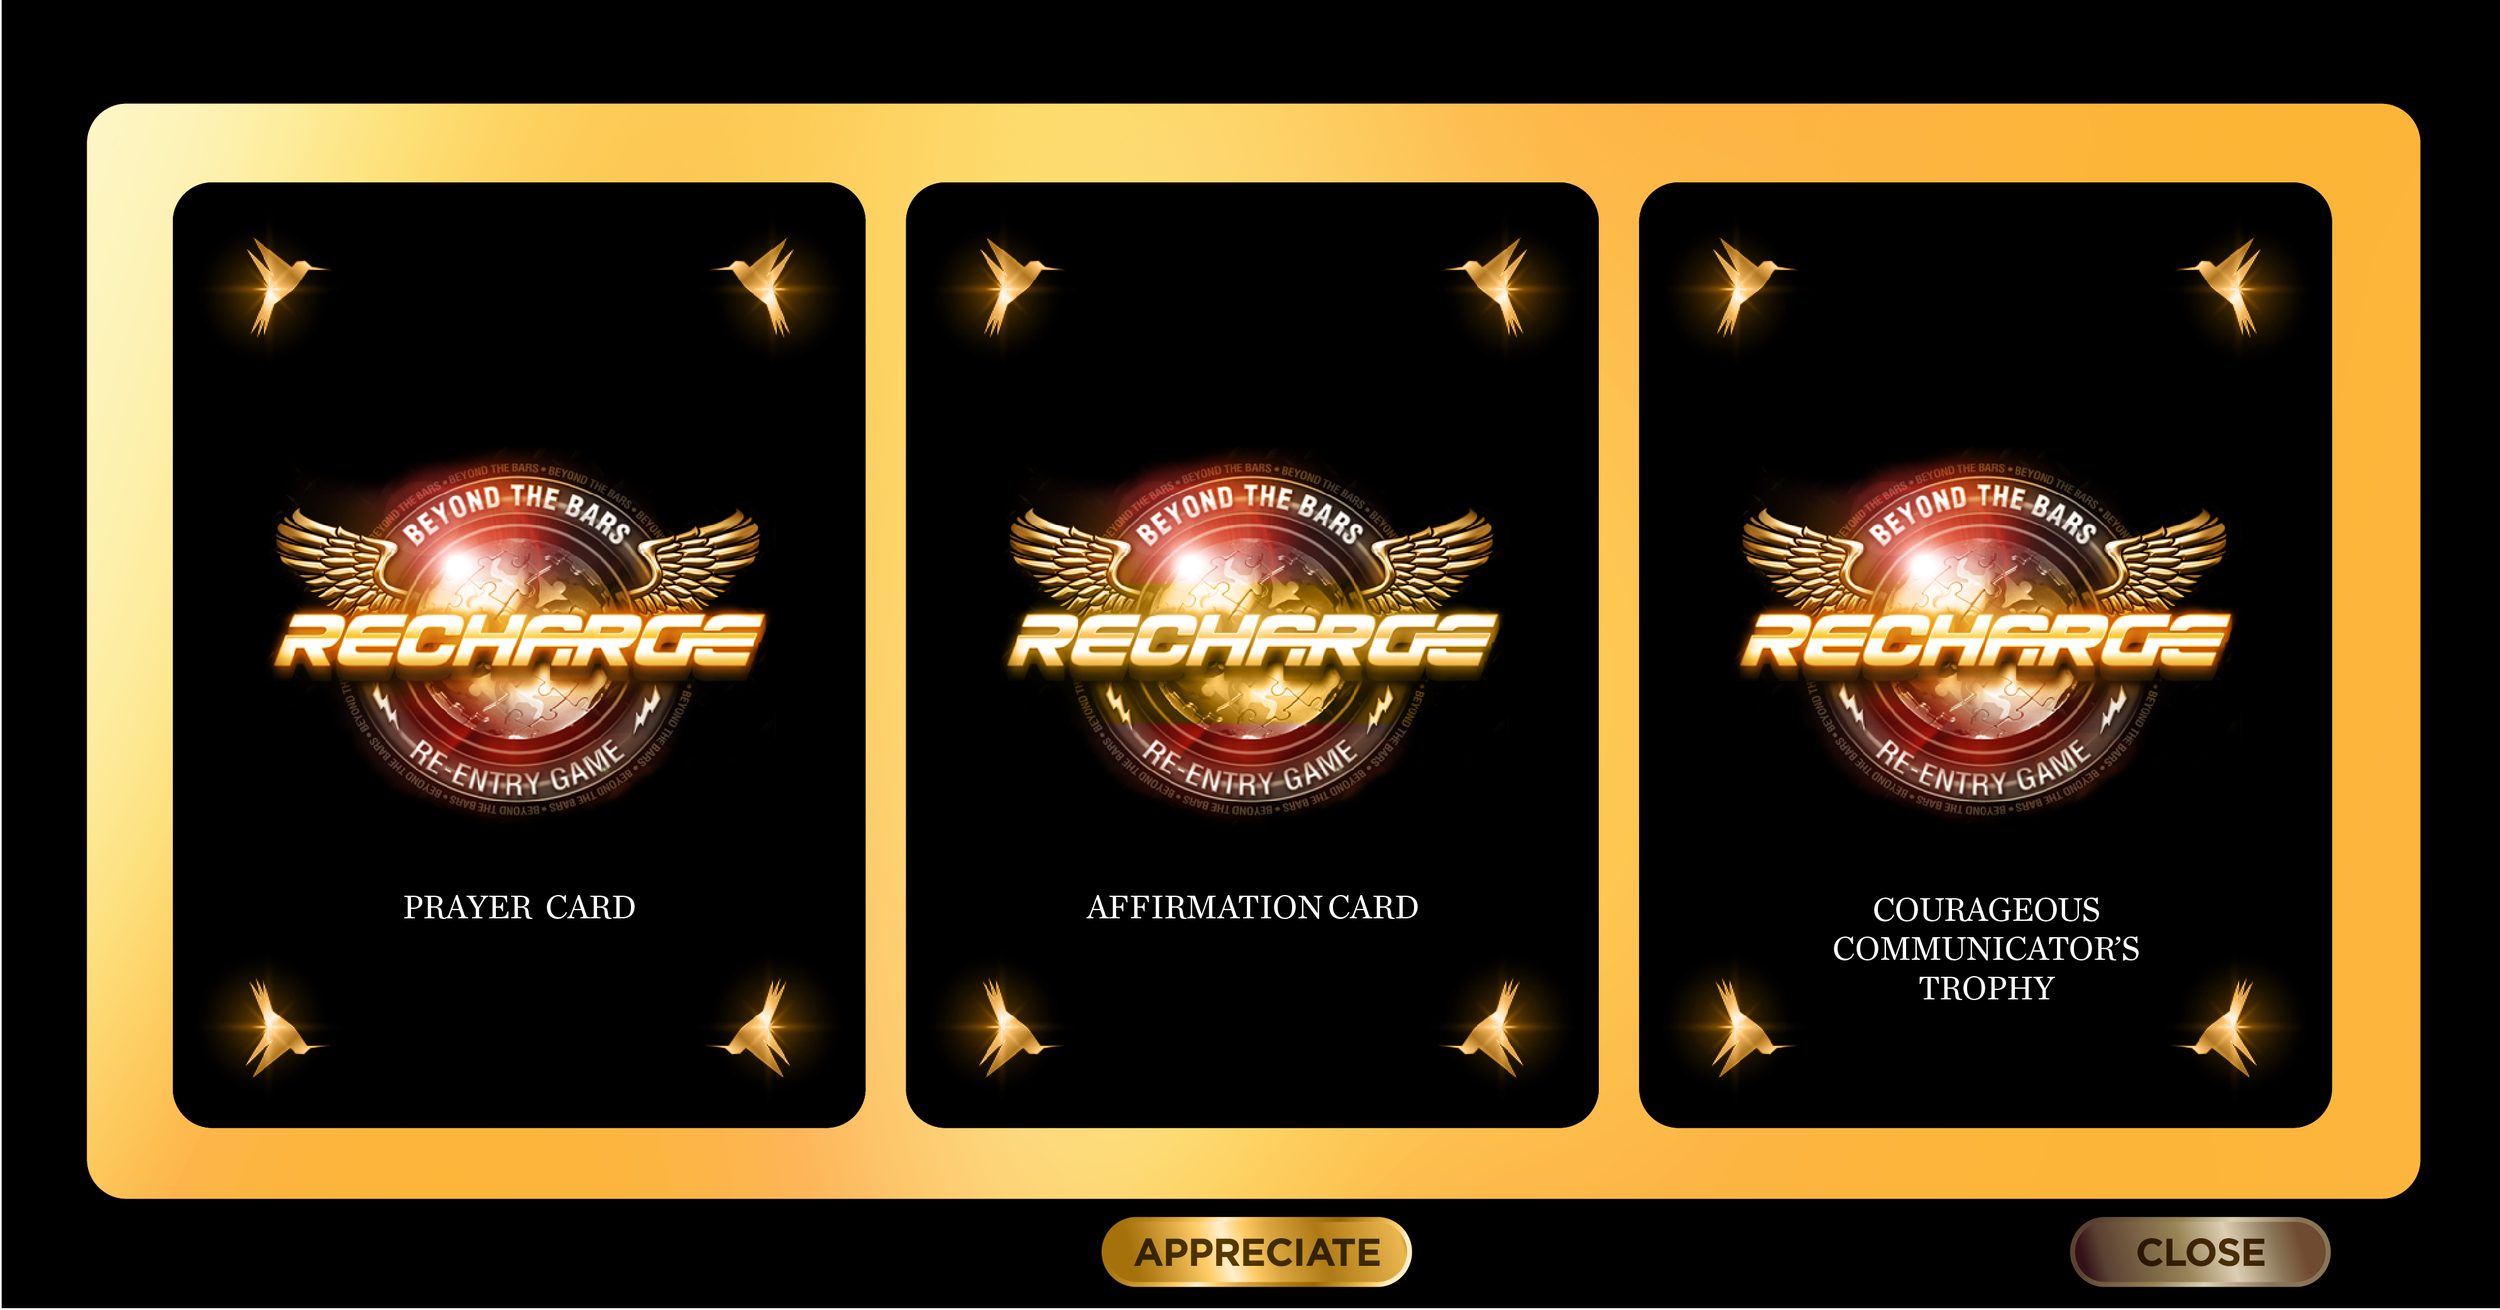 RECHARGE_gameboard-mockup_end-01.png